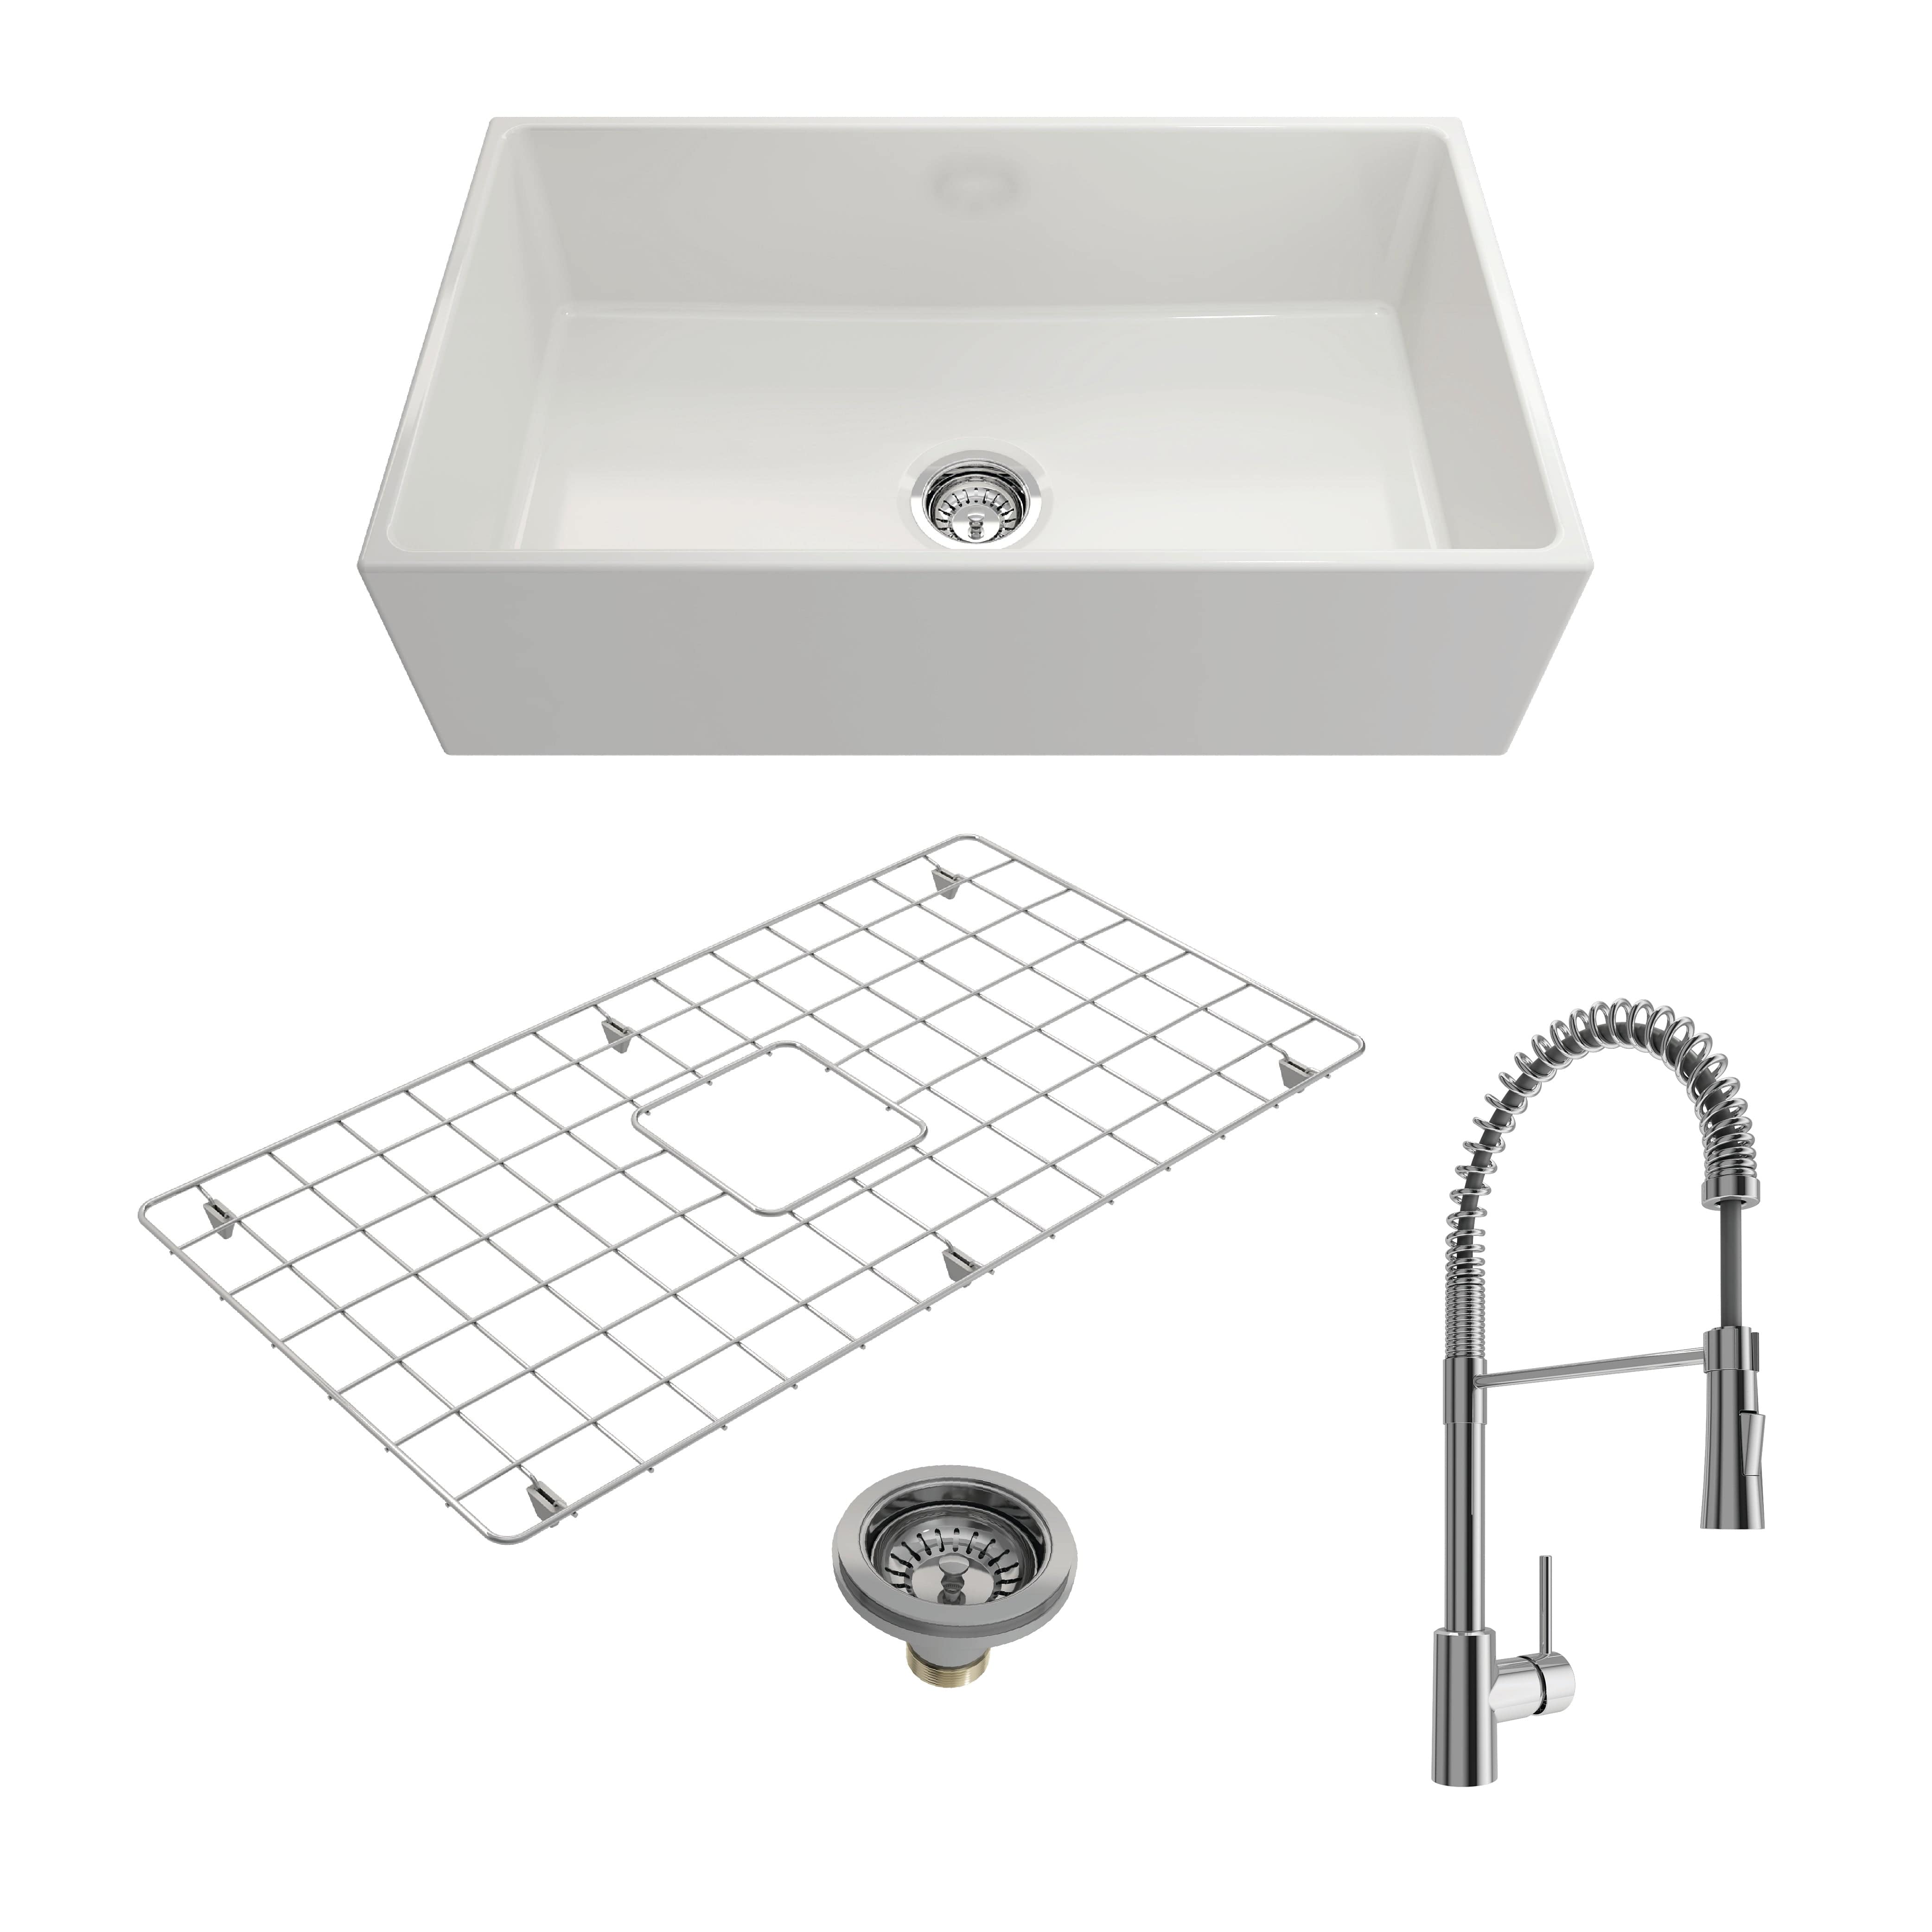 BOCCHI CONTEMPO 33" Fireclay Kitchen Sink with Protective Bottom Grid and Strainer with Livenza 2.0 Faucet